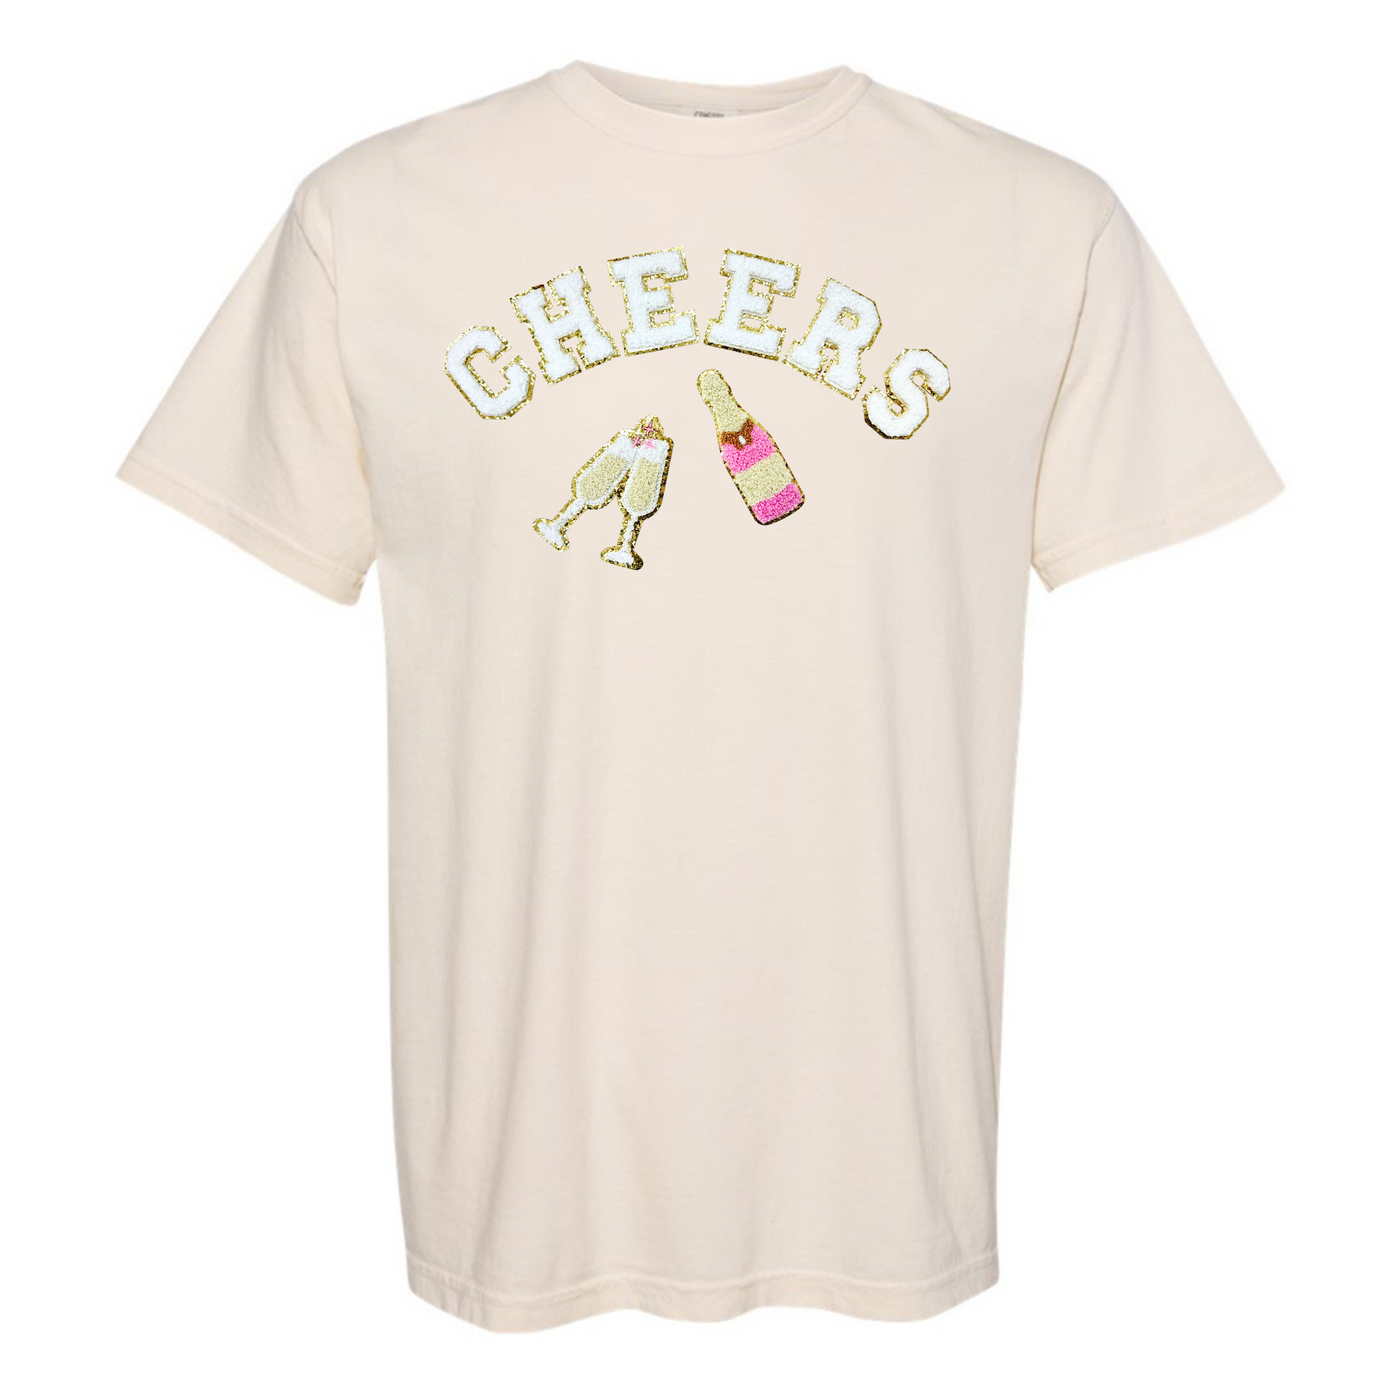 'Cheers' Letter Patch Tee